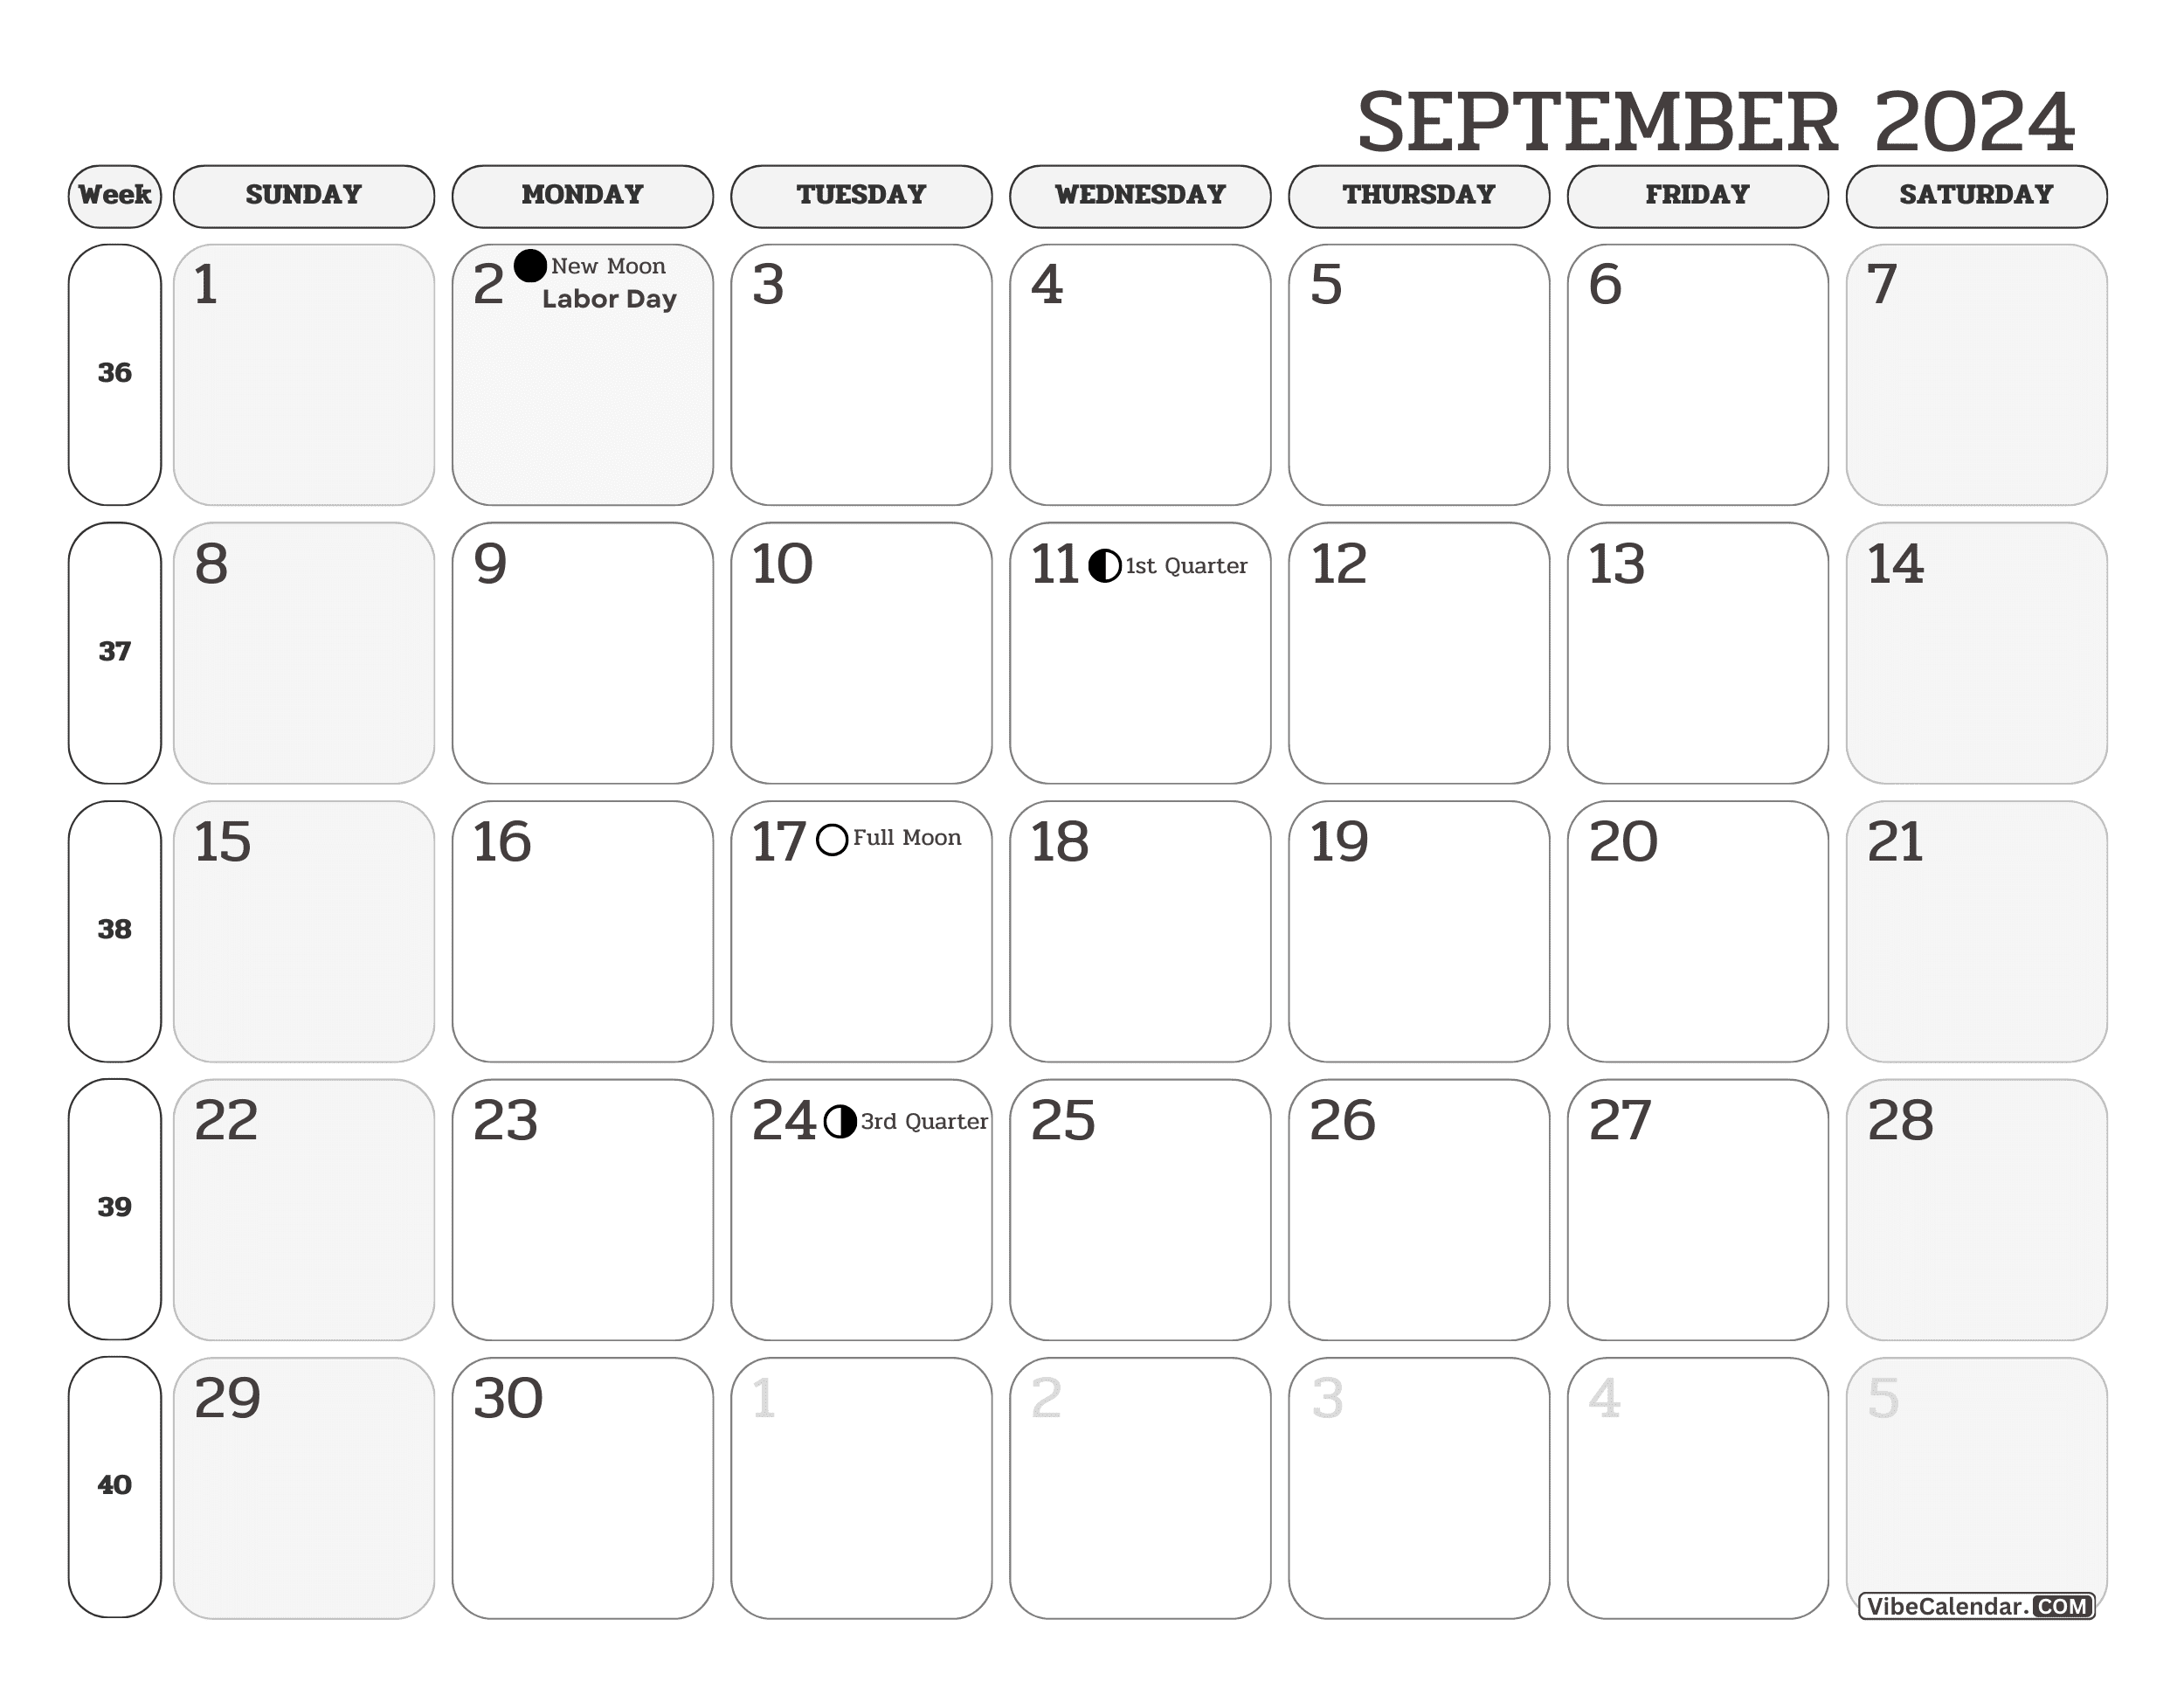 September 2024 Calendar with Week Numbers and Holidays